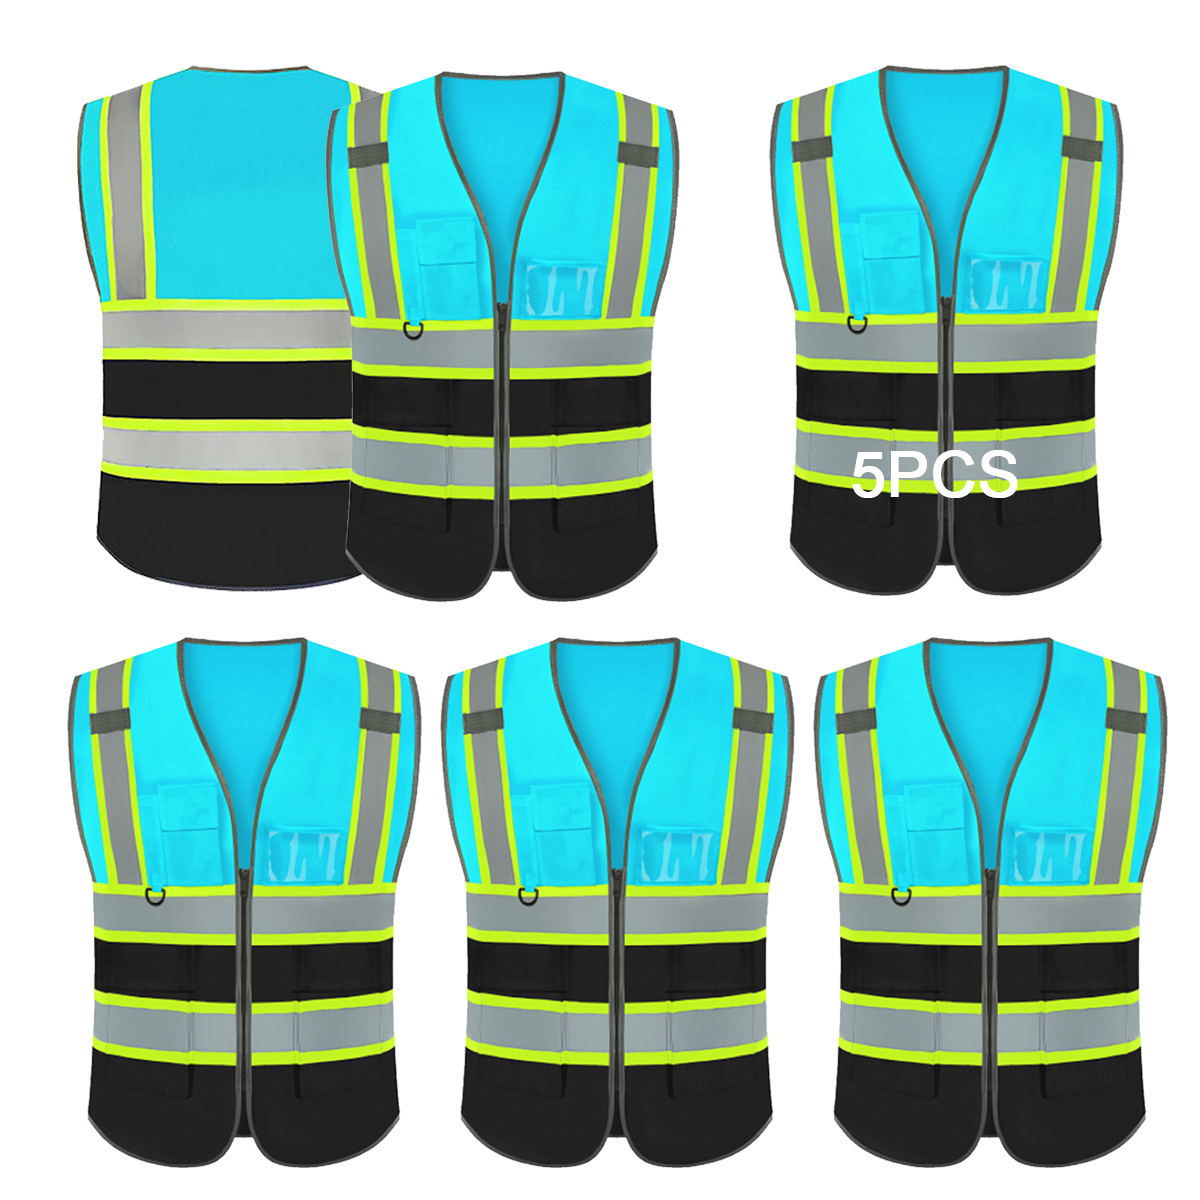 blue and black with yellow edge vest